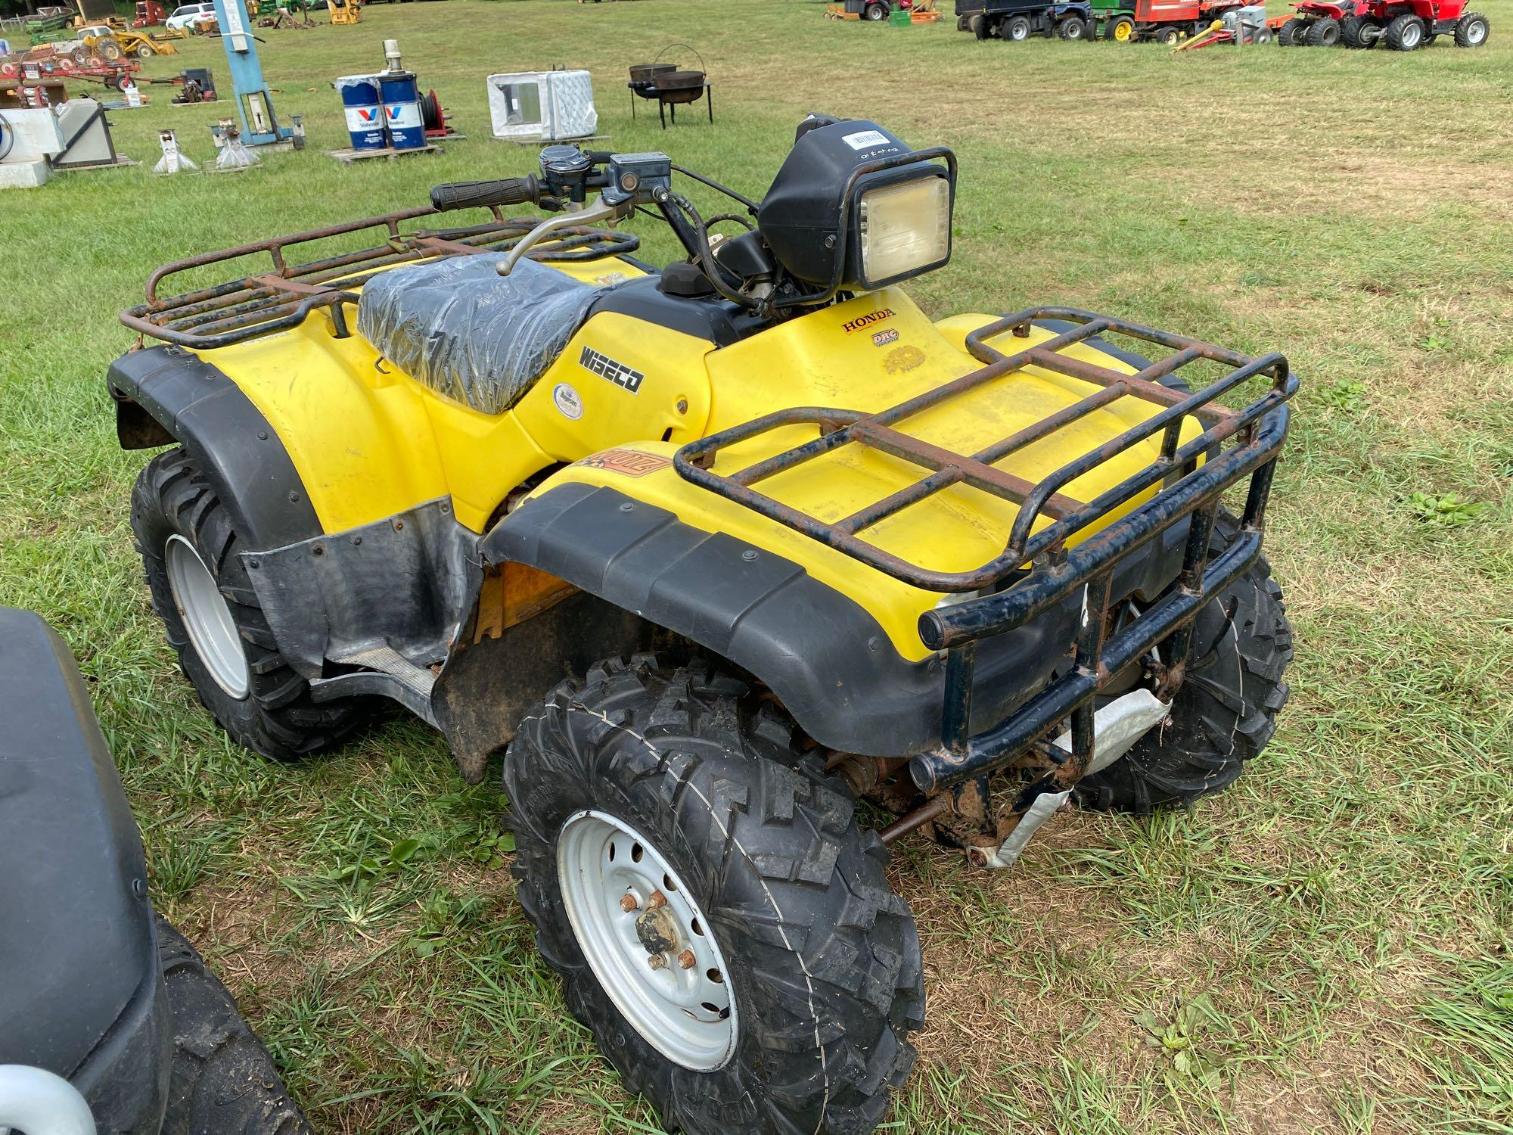 Image for 2003 Honda Foreman 450 4 WD 1,494 Hours - Per Seller, starts and runs good, new tires and new seat.